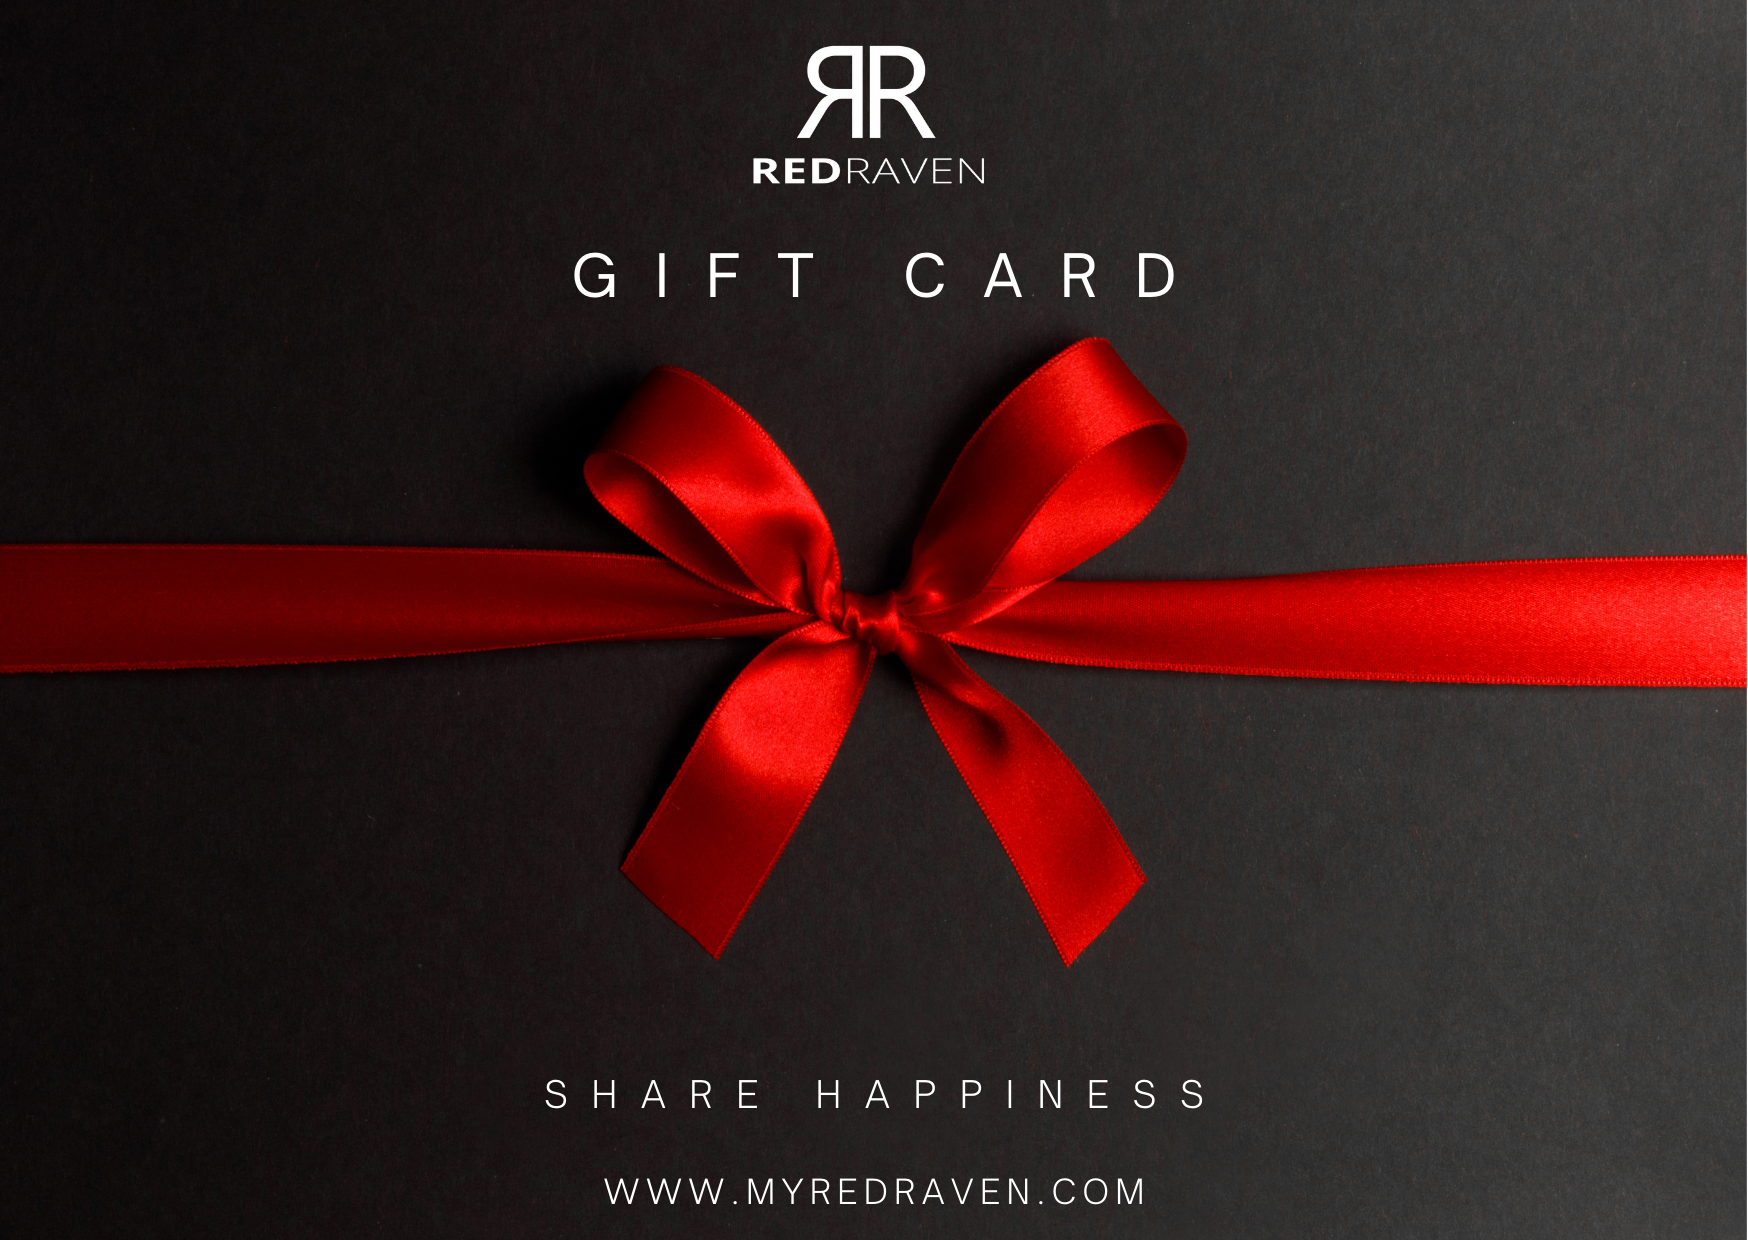 Red Raven Gift Card - Red Raven